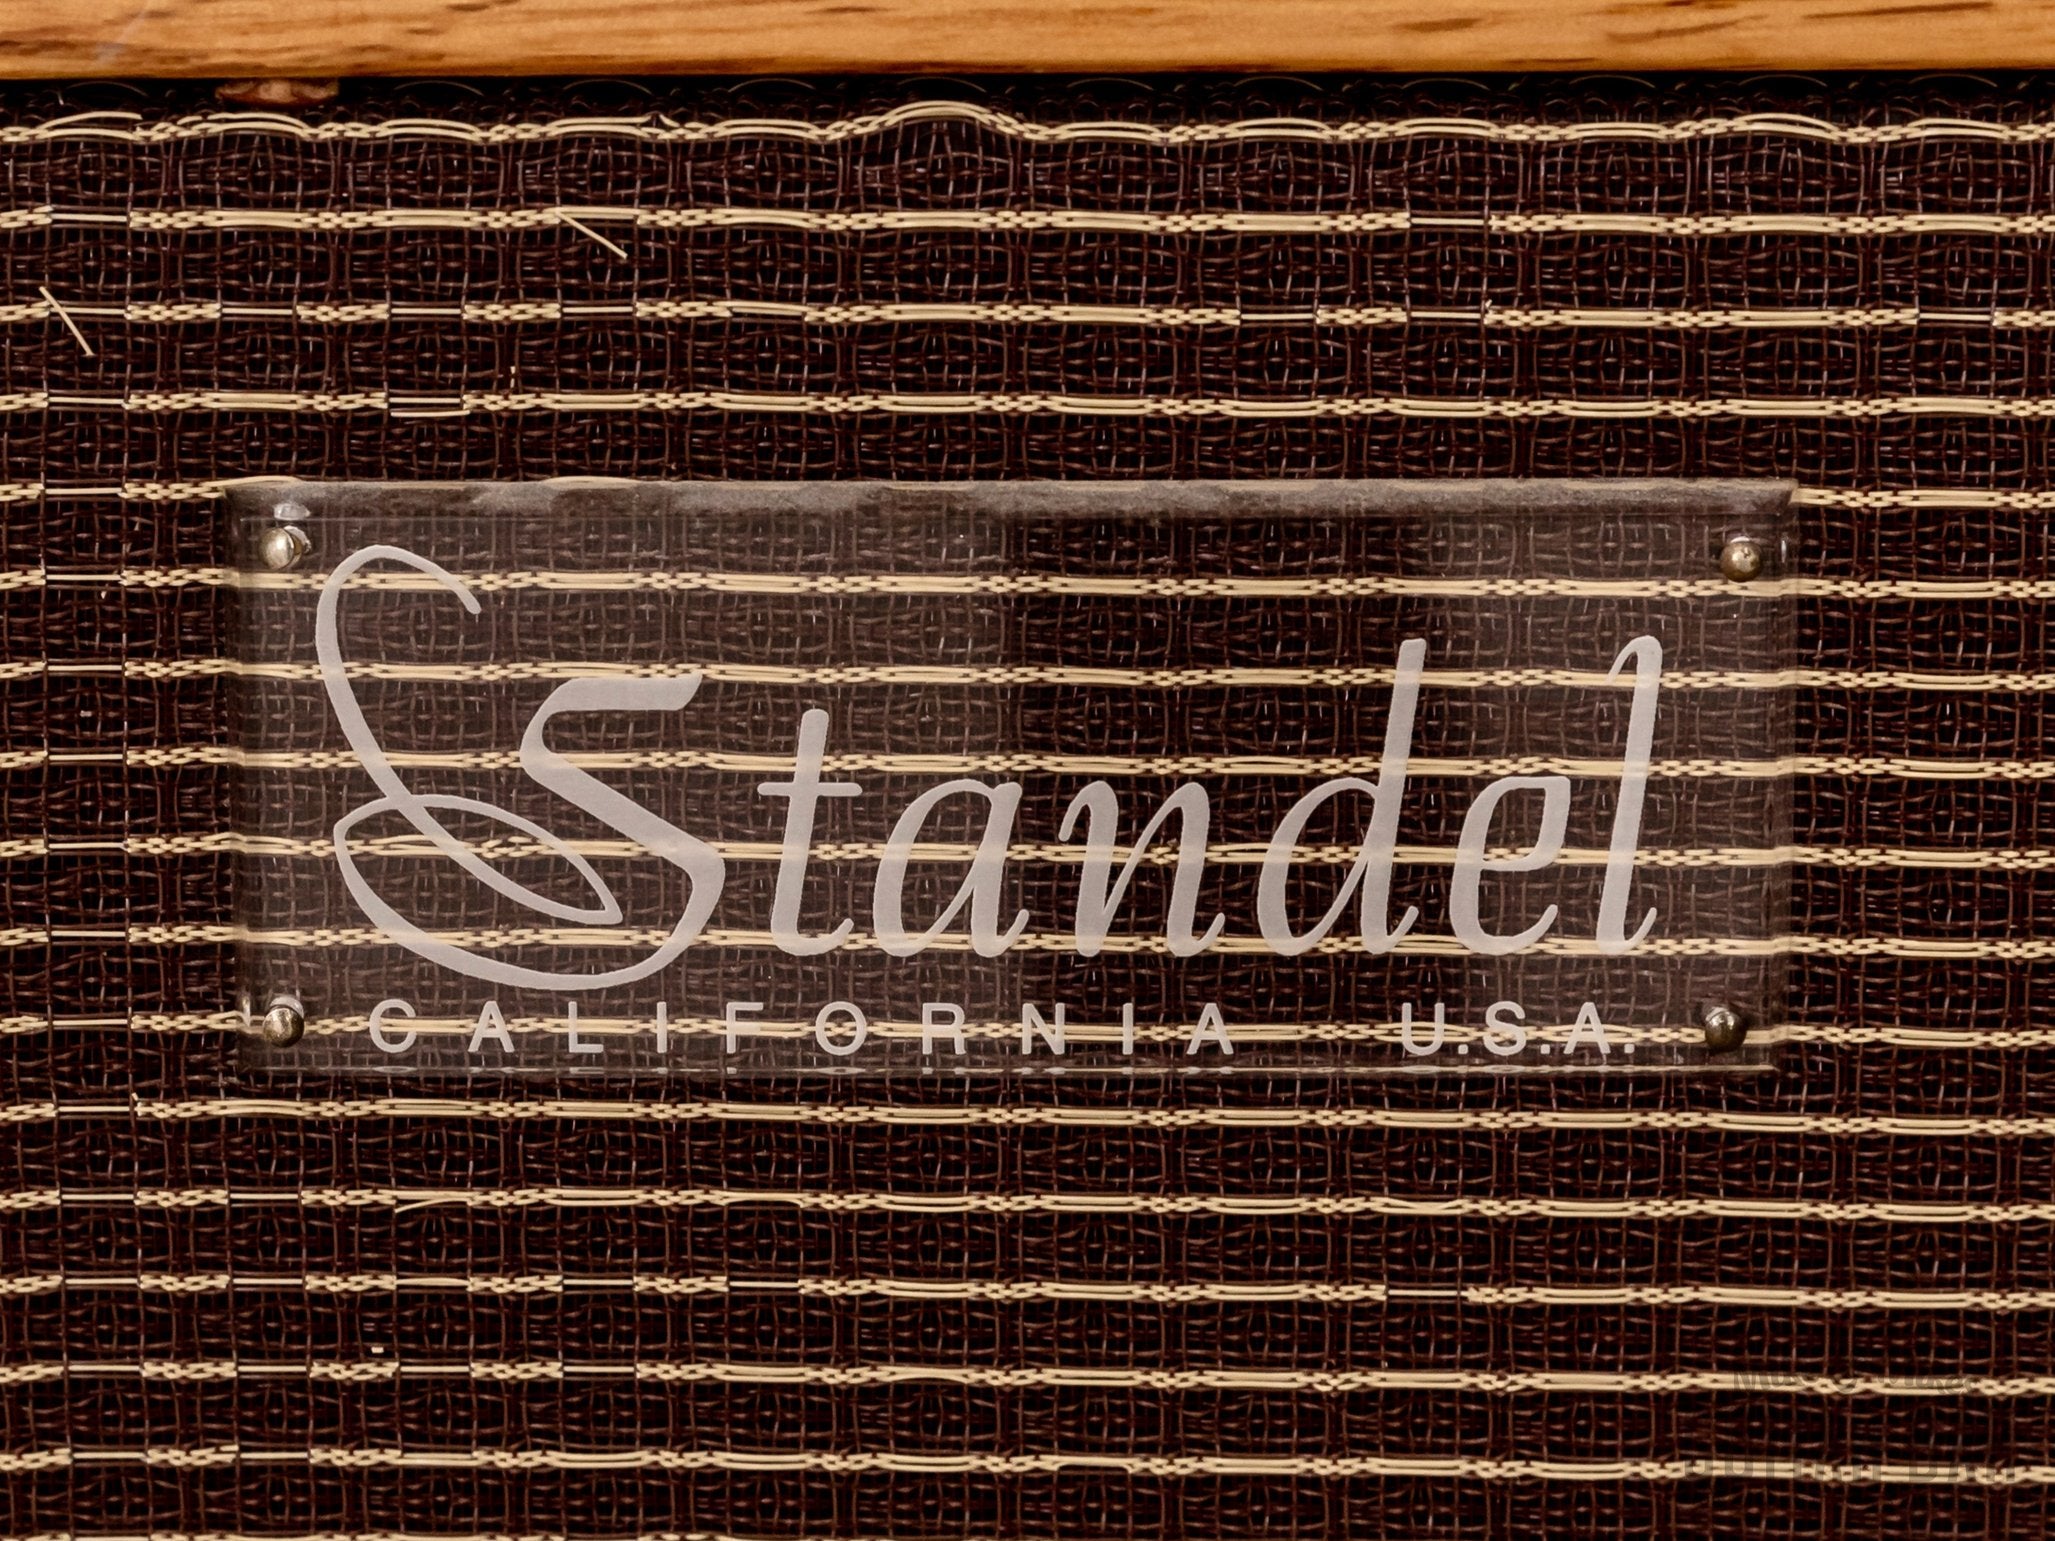 2000 Standel 25L12 Vintage Plus 1x12” USA-Made Hand-Wired Boutique Tube Amp, Near-Mint, 20C12